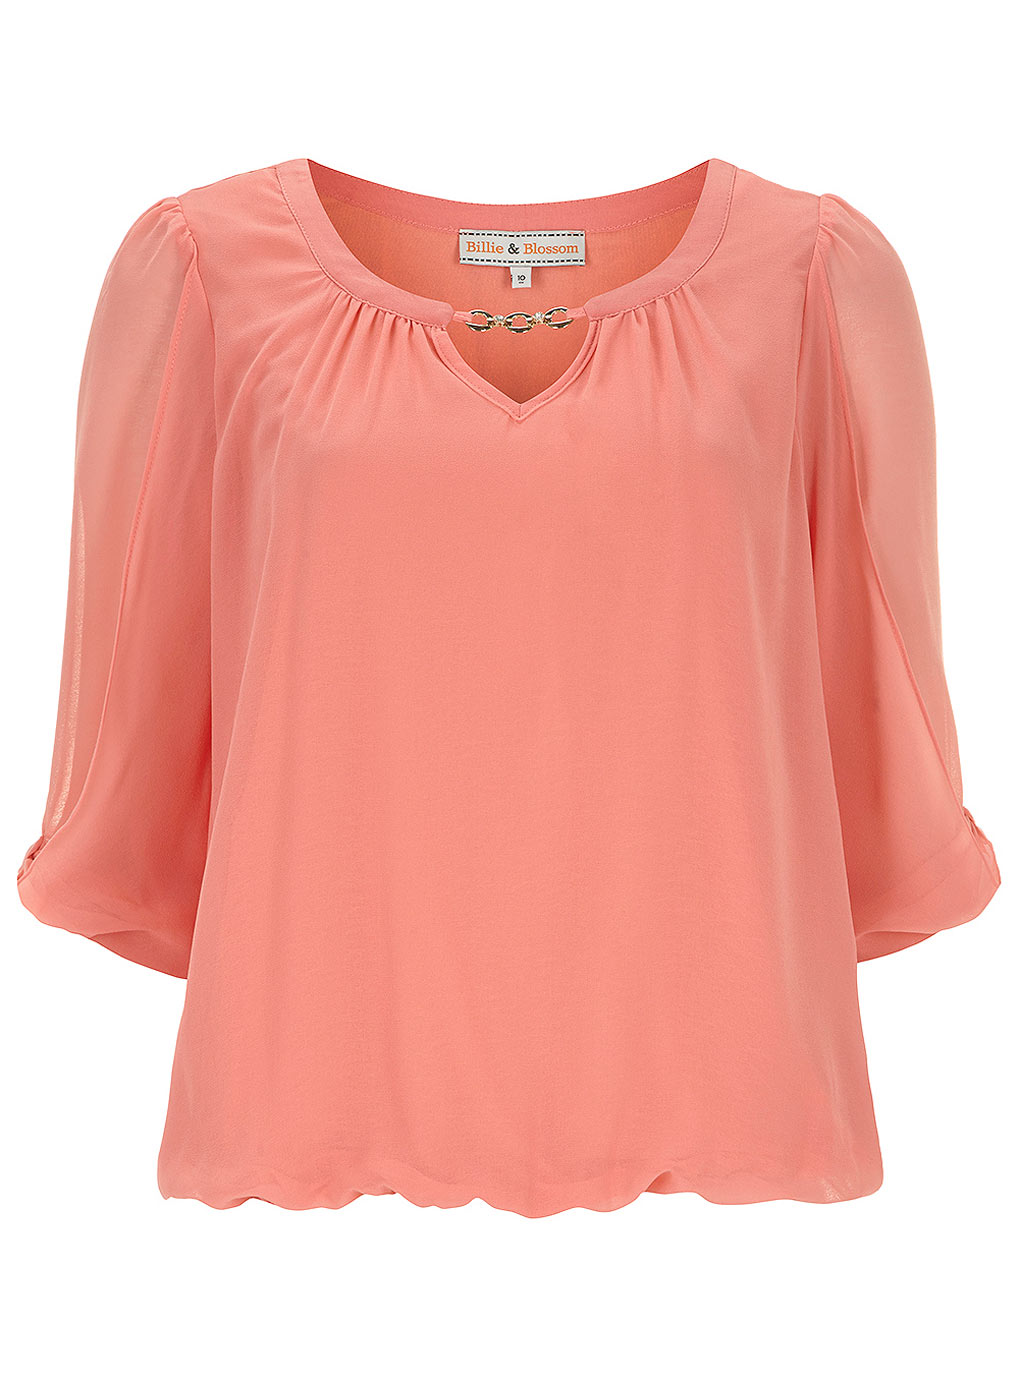 Billie and Blossom Coral gold bar blouse 12273860